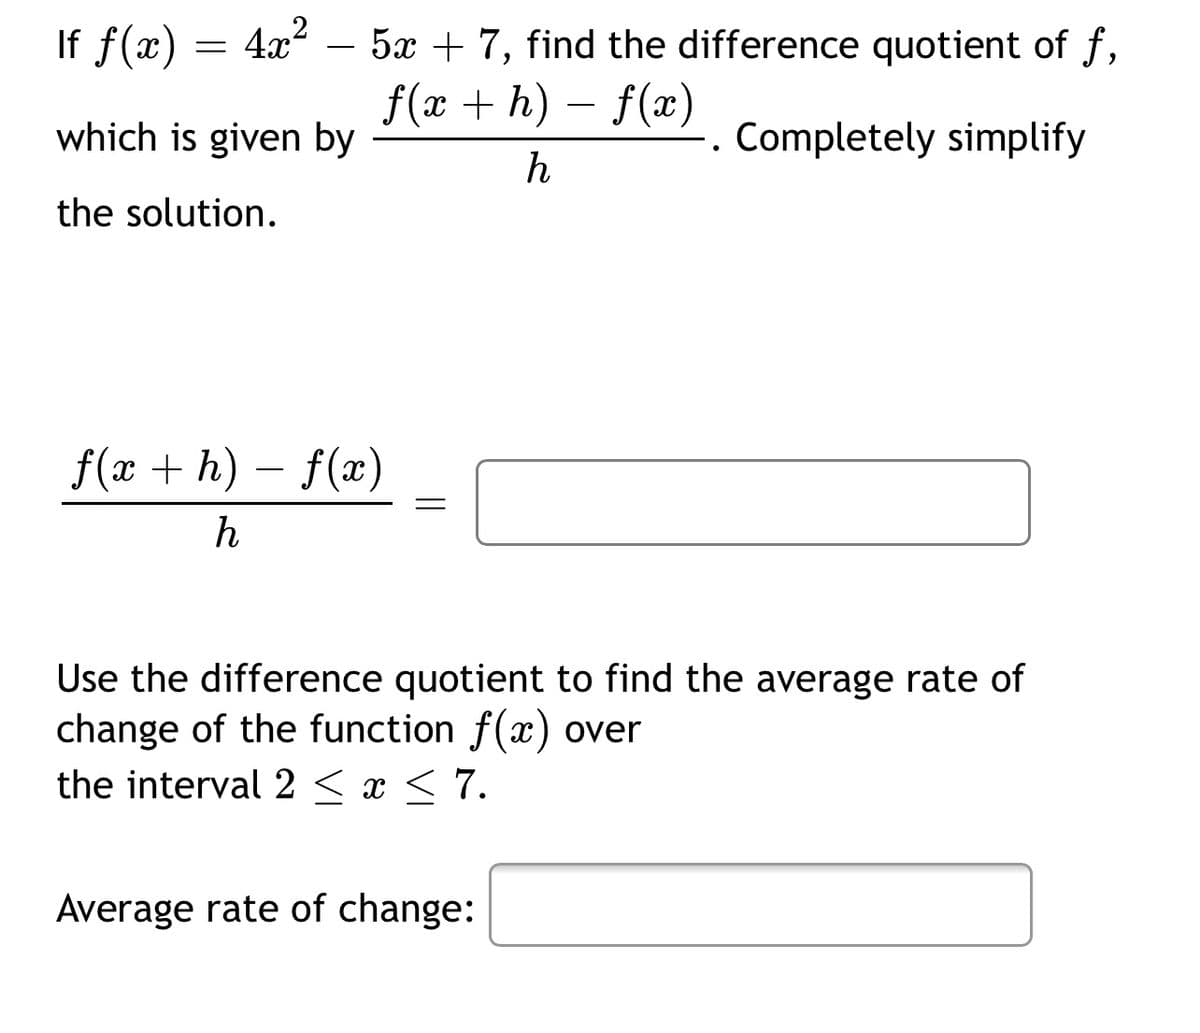 If f(x) =
4x – 5x + 7, find the difference quotient of f,
f(x + h) – f(x)
which is given by
Completely simplify
h
the solution.
f(x + h) – f(x)
-
Use the difference quotient to find the average rate of
change of the function f(x) over
the interval 2 < x < 7.
Average rate of change:
